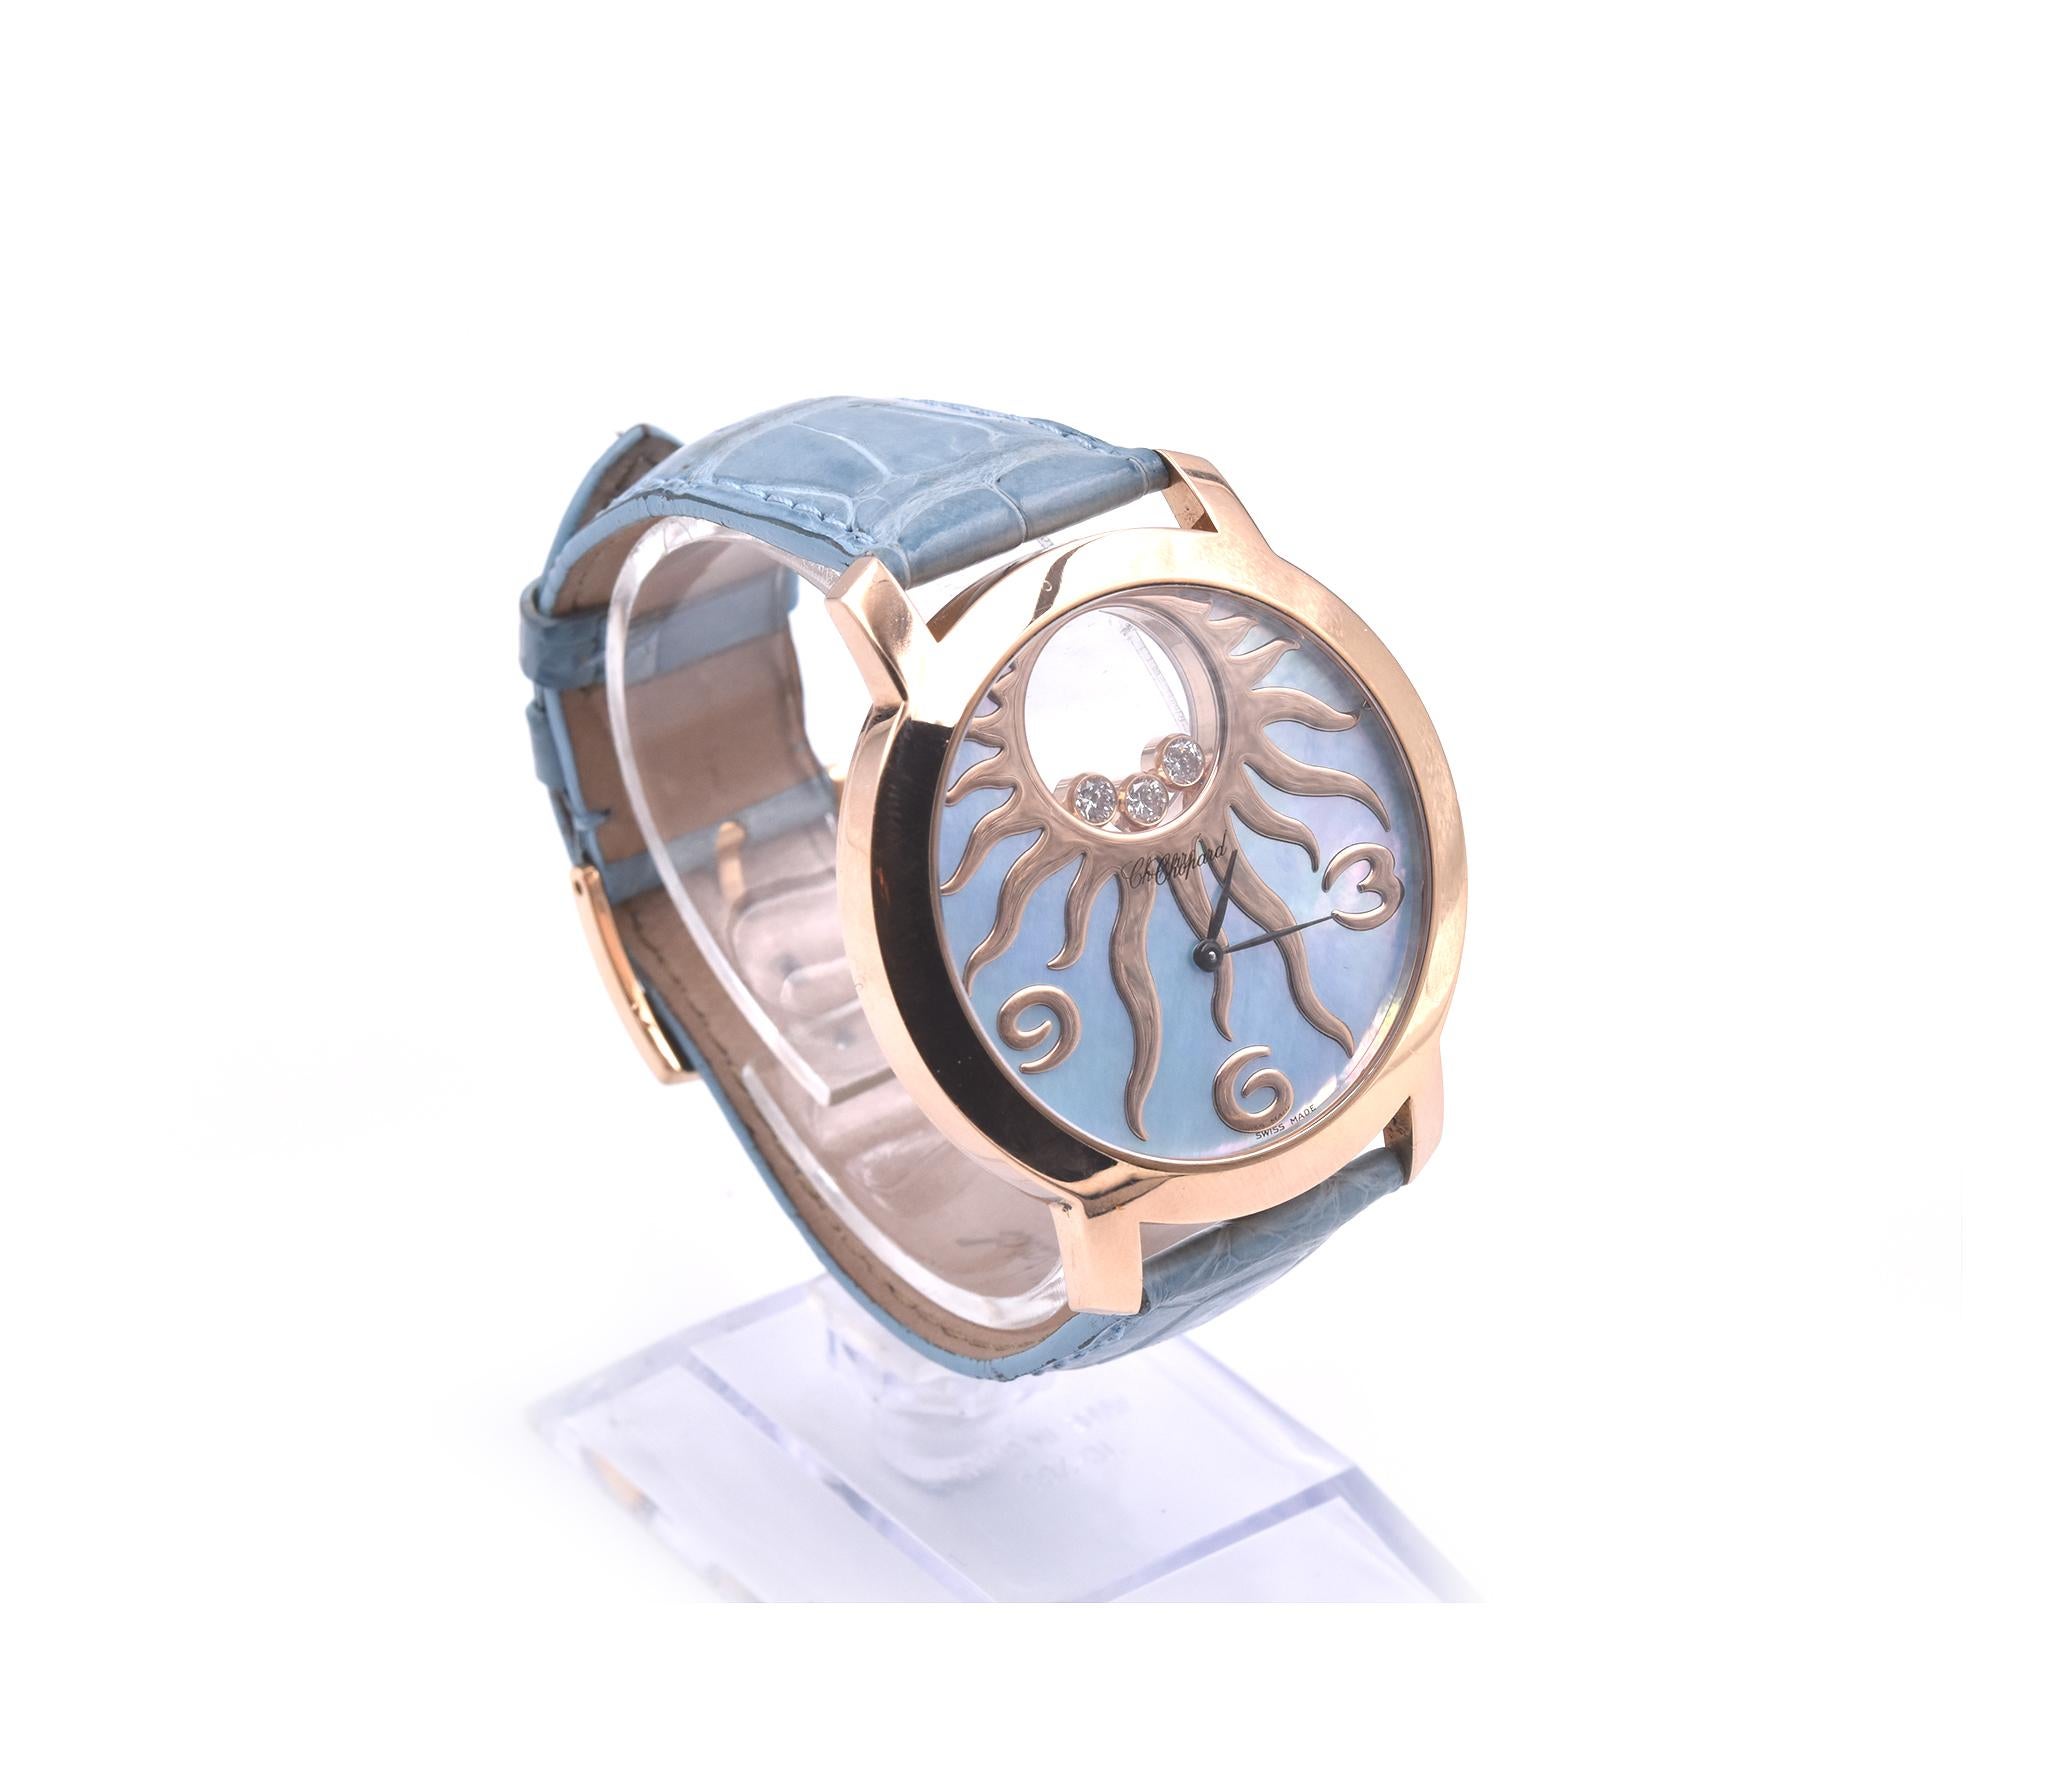 Movement: quartz
Function: hours, minutes
Case: 40mm 18k rose gold case, sapphire protective crystal, pull/push crown, water resistant to 30m
Band: blue leather band with 18k rose gold tang buckle
Dial: blue mother of pearl with rose gold Arabic